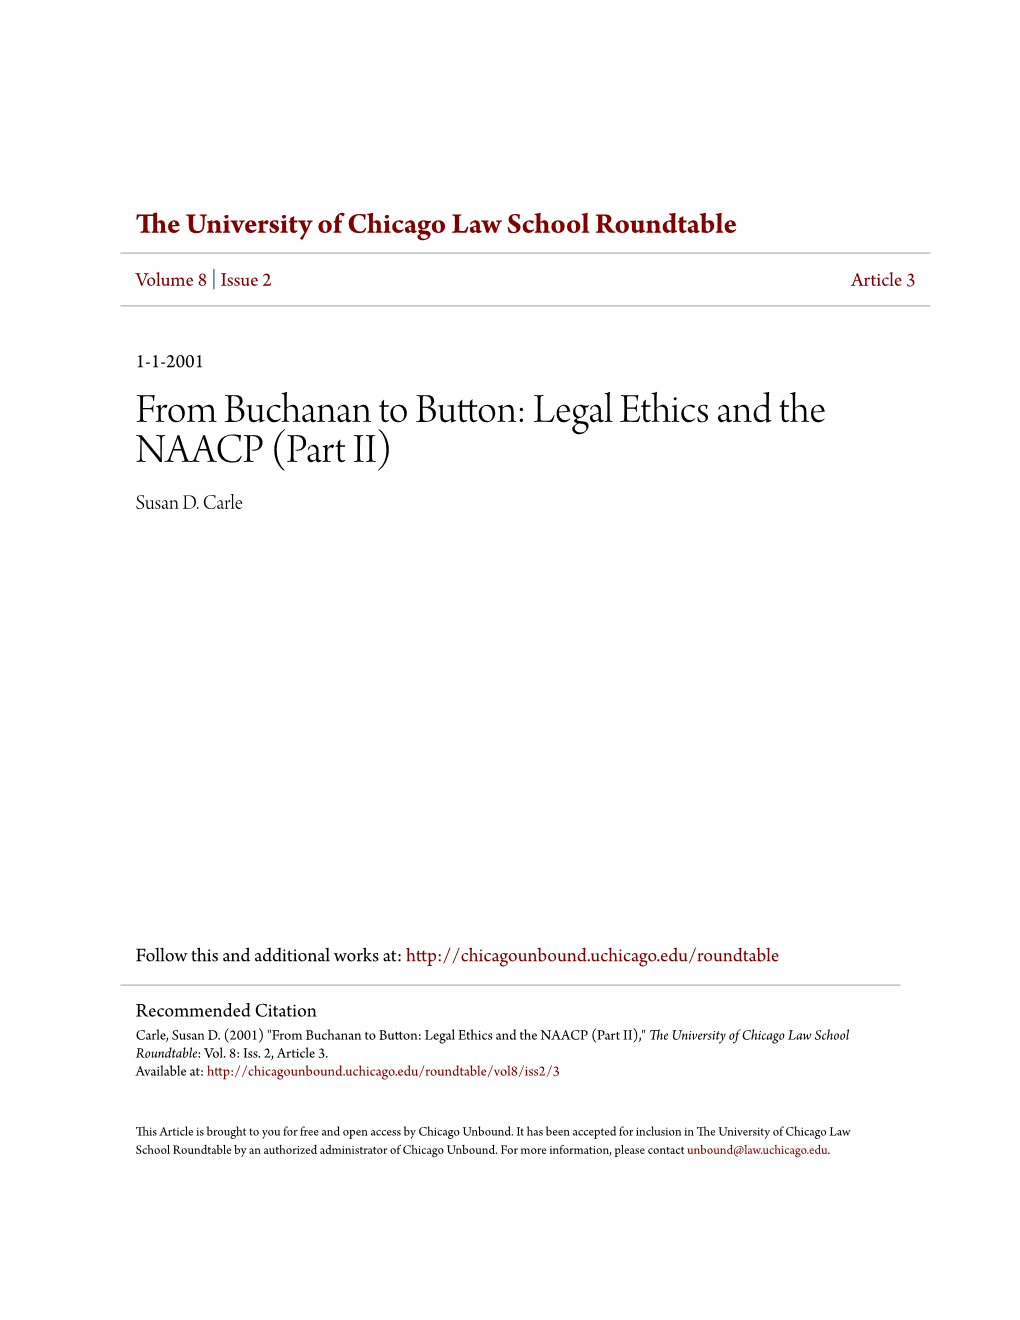 Legal Ethics and the NAACP (Part II) Susan D